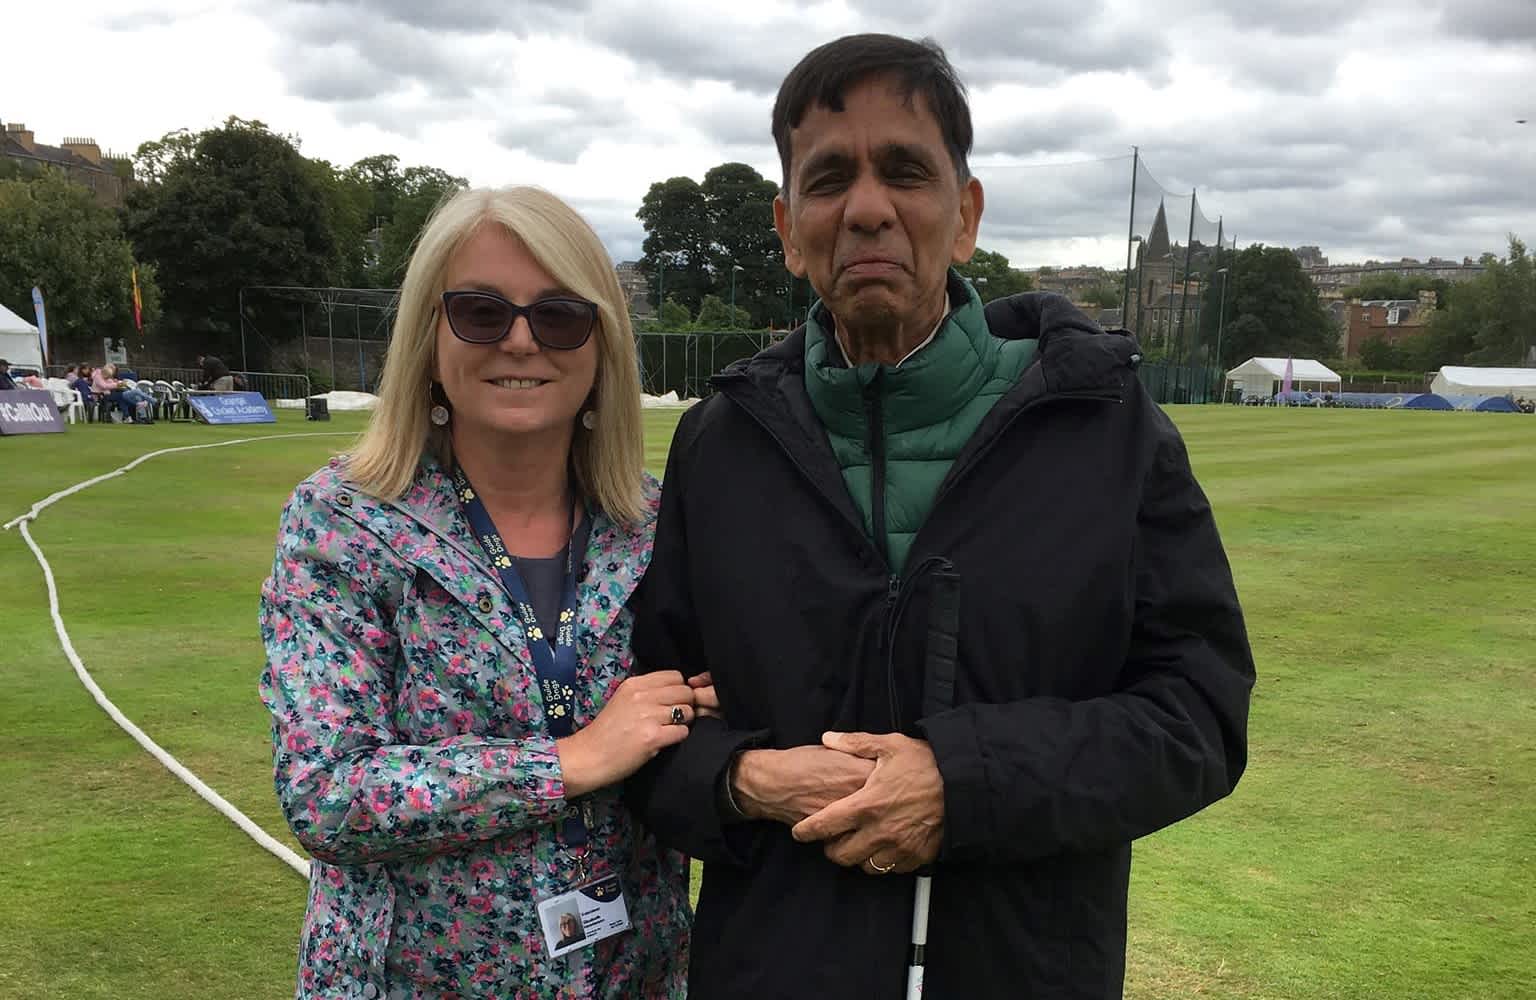 A my sighted guide partnership stand together on the edge of a cricket ground.